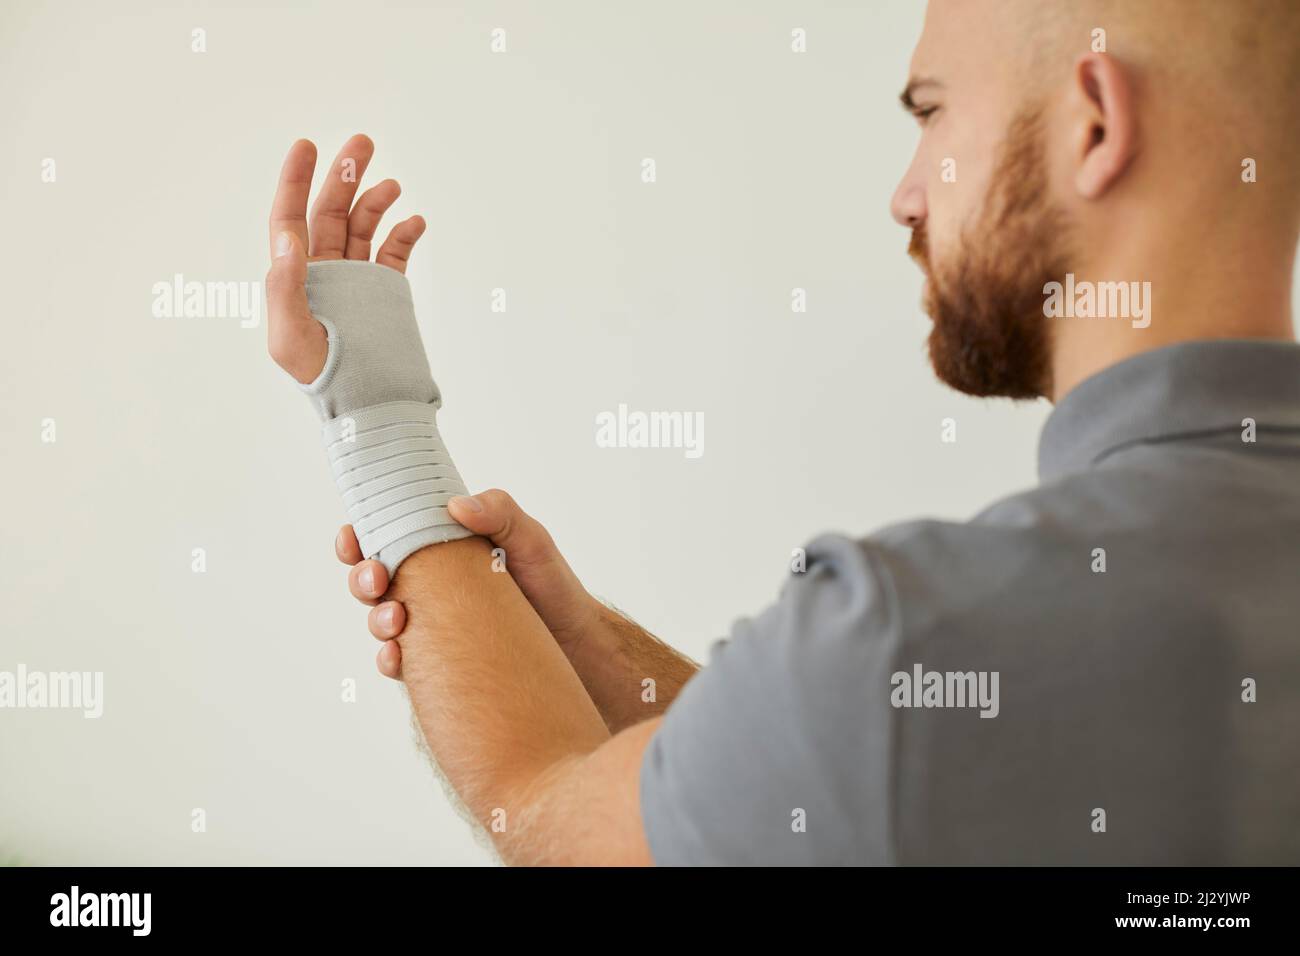 Man uses medical bandage for wrist as preventive measure for sports or physical activity. Stock Photo